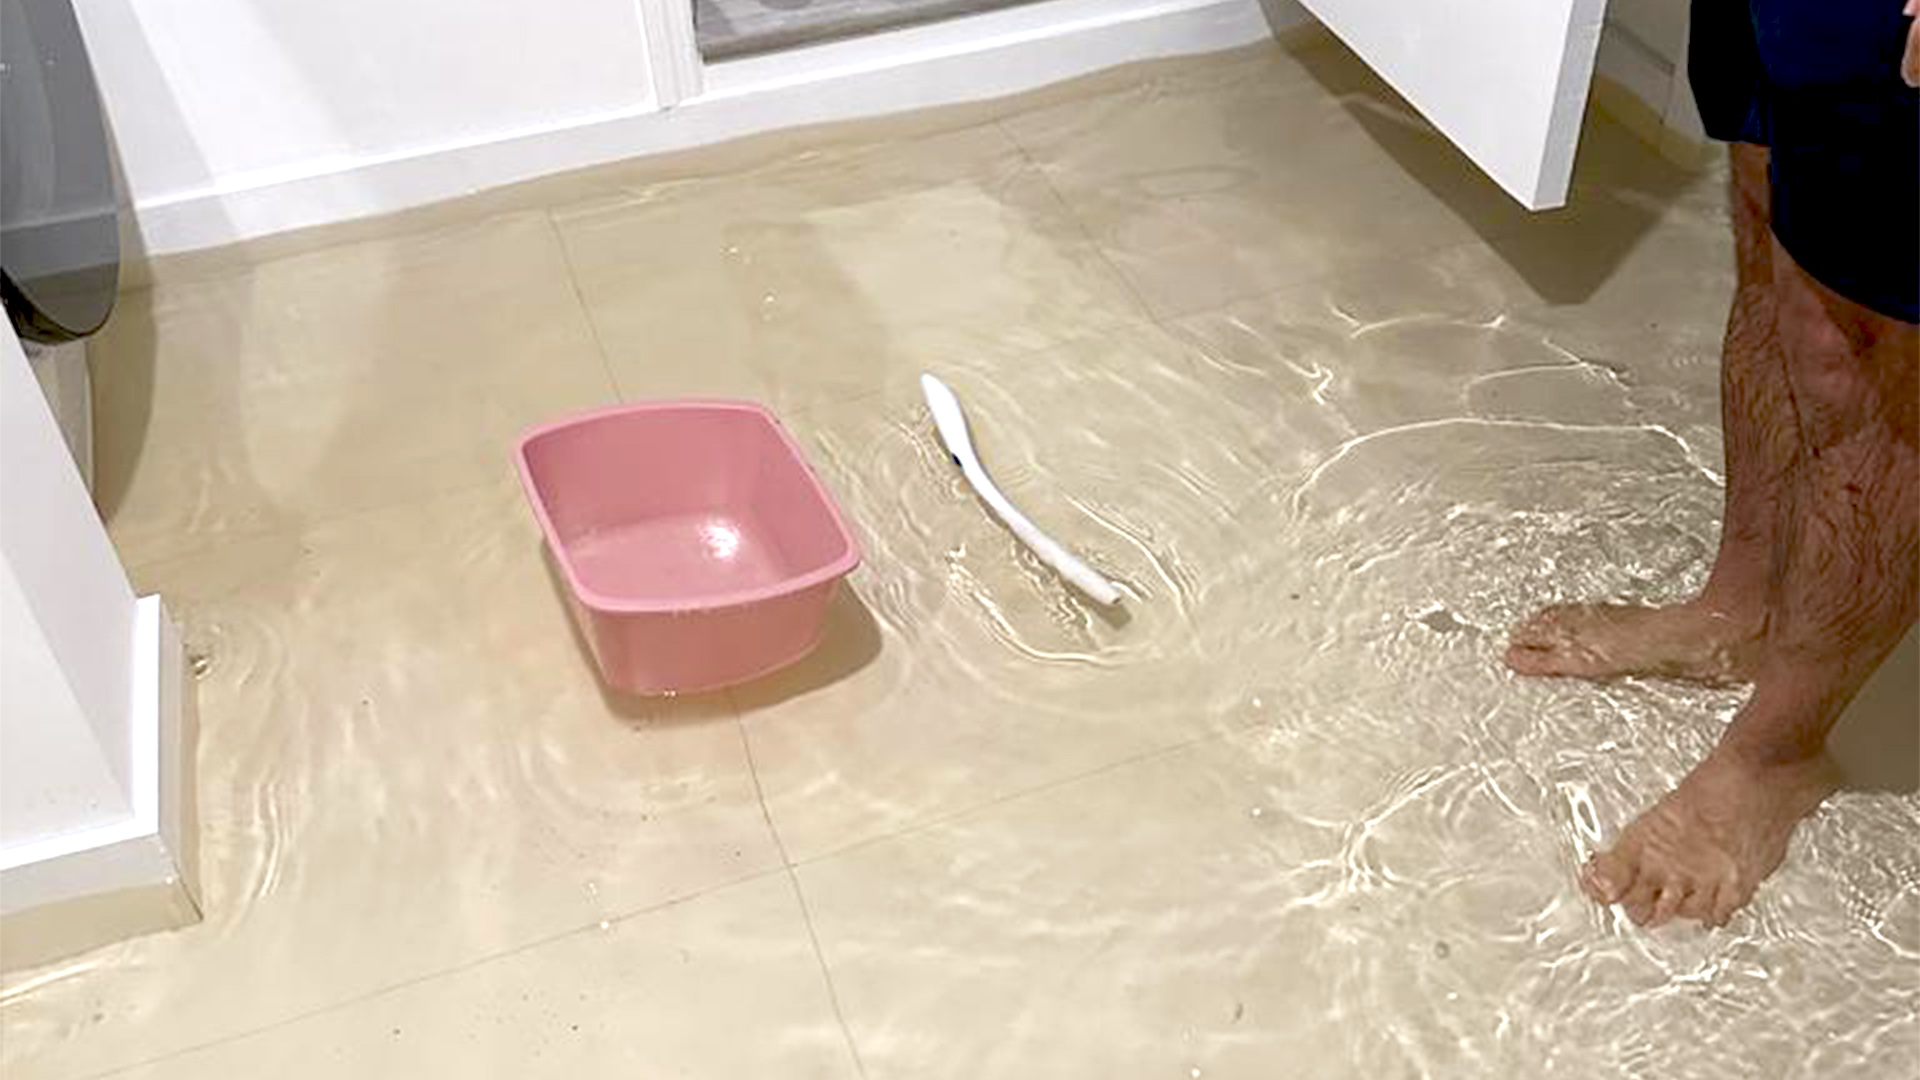 5 rules to follow to get the insurance company to pay for your water damage